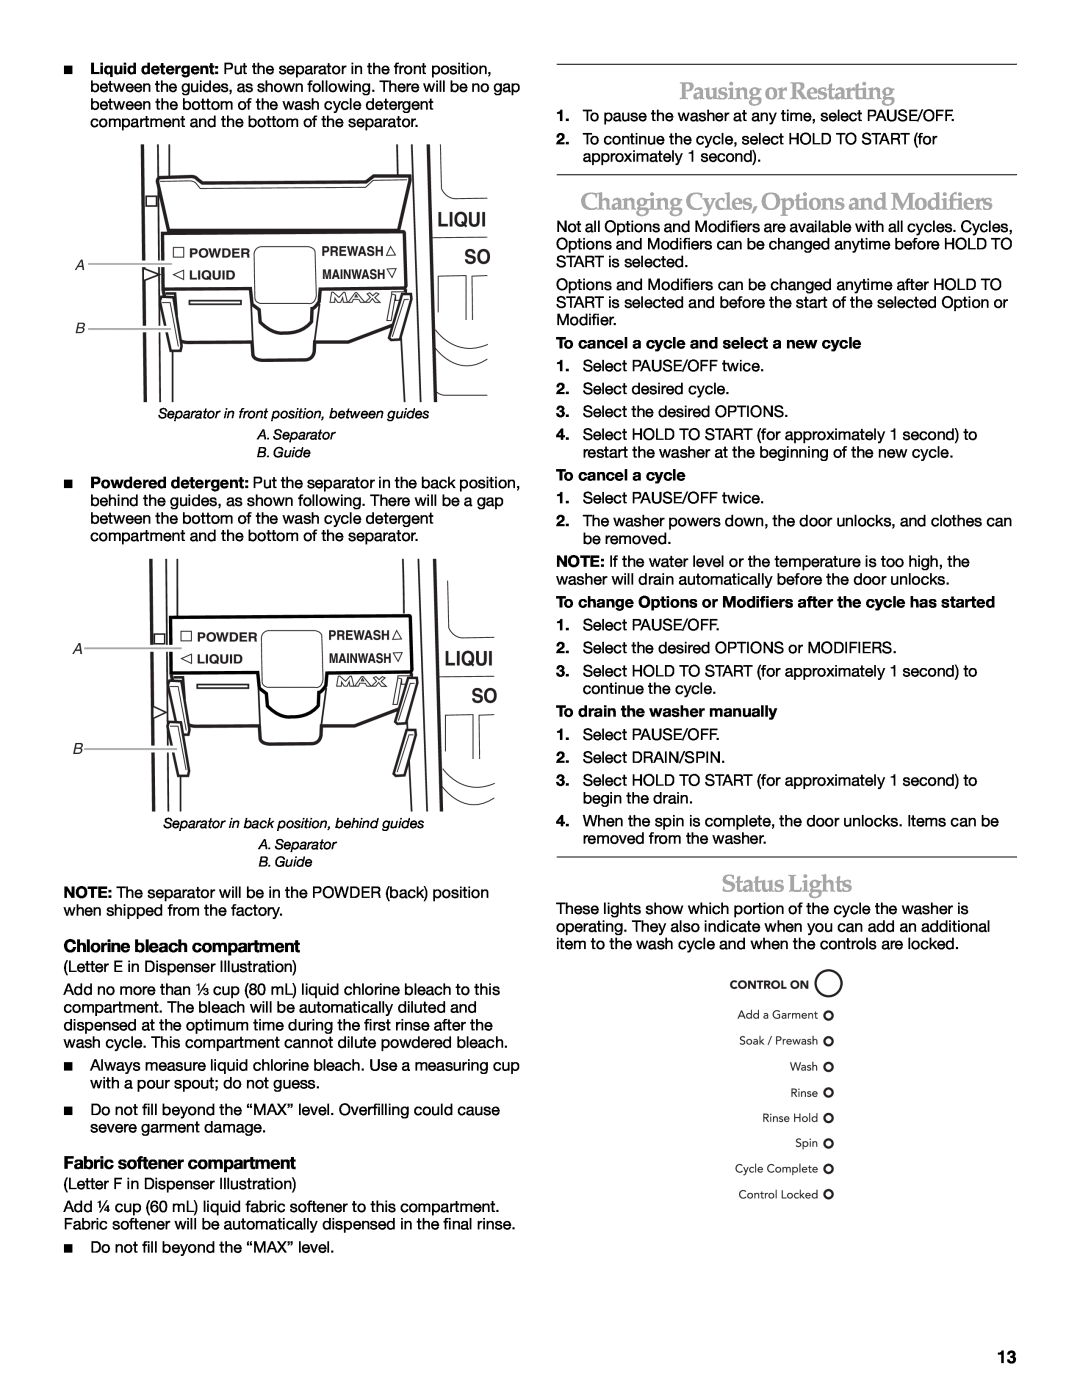 Maytag 8182969 manual Pausing or Restarting, Changing Cycles, Options and Modifiers, Status Lights, Liqui 